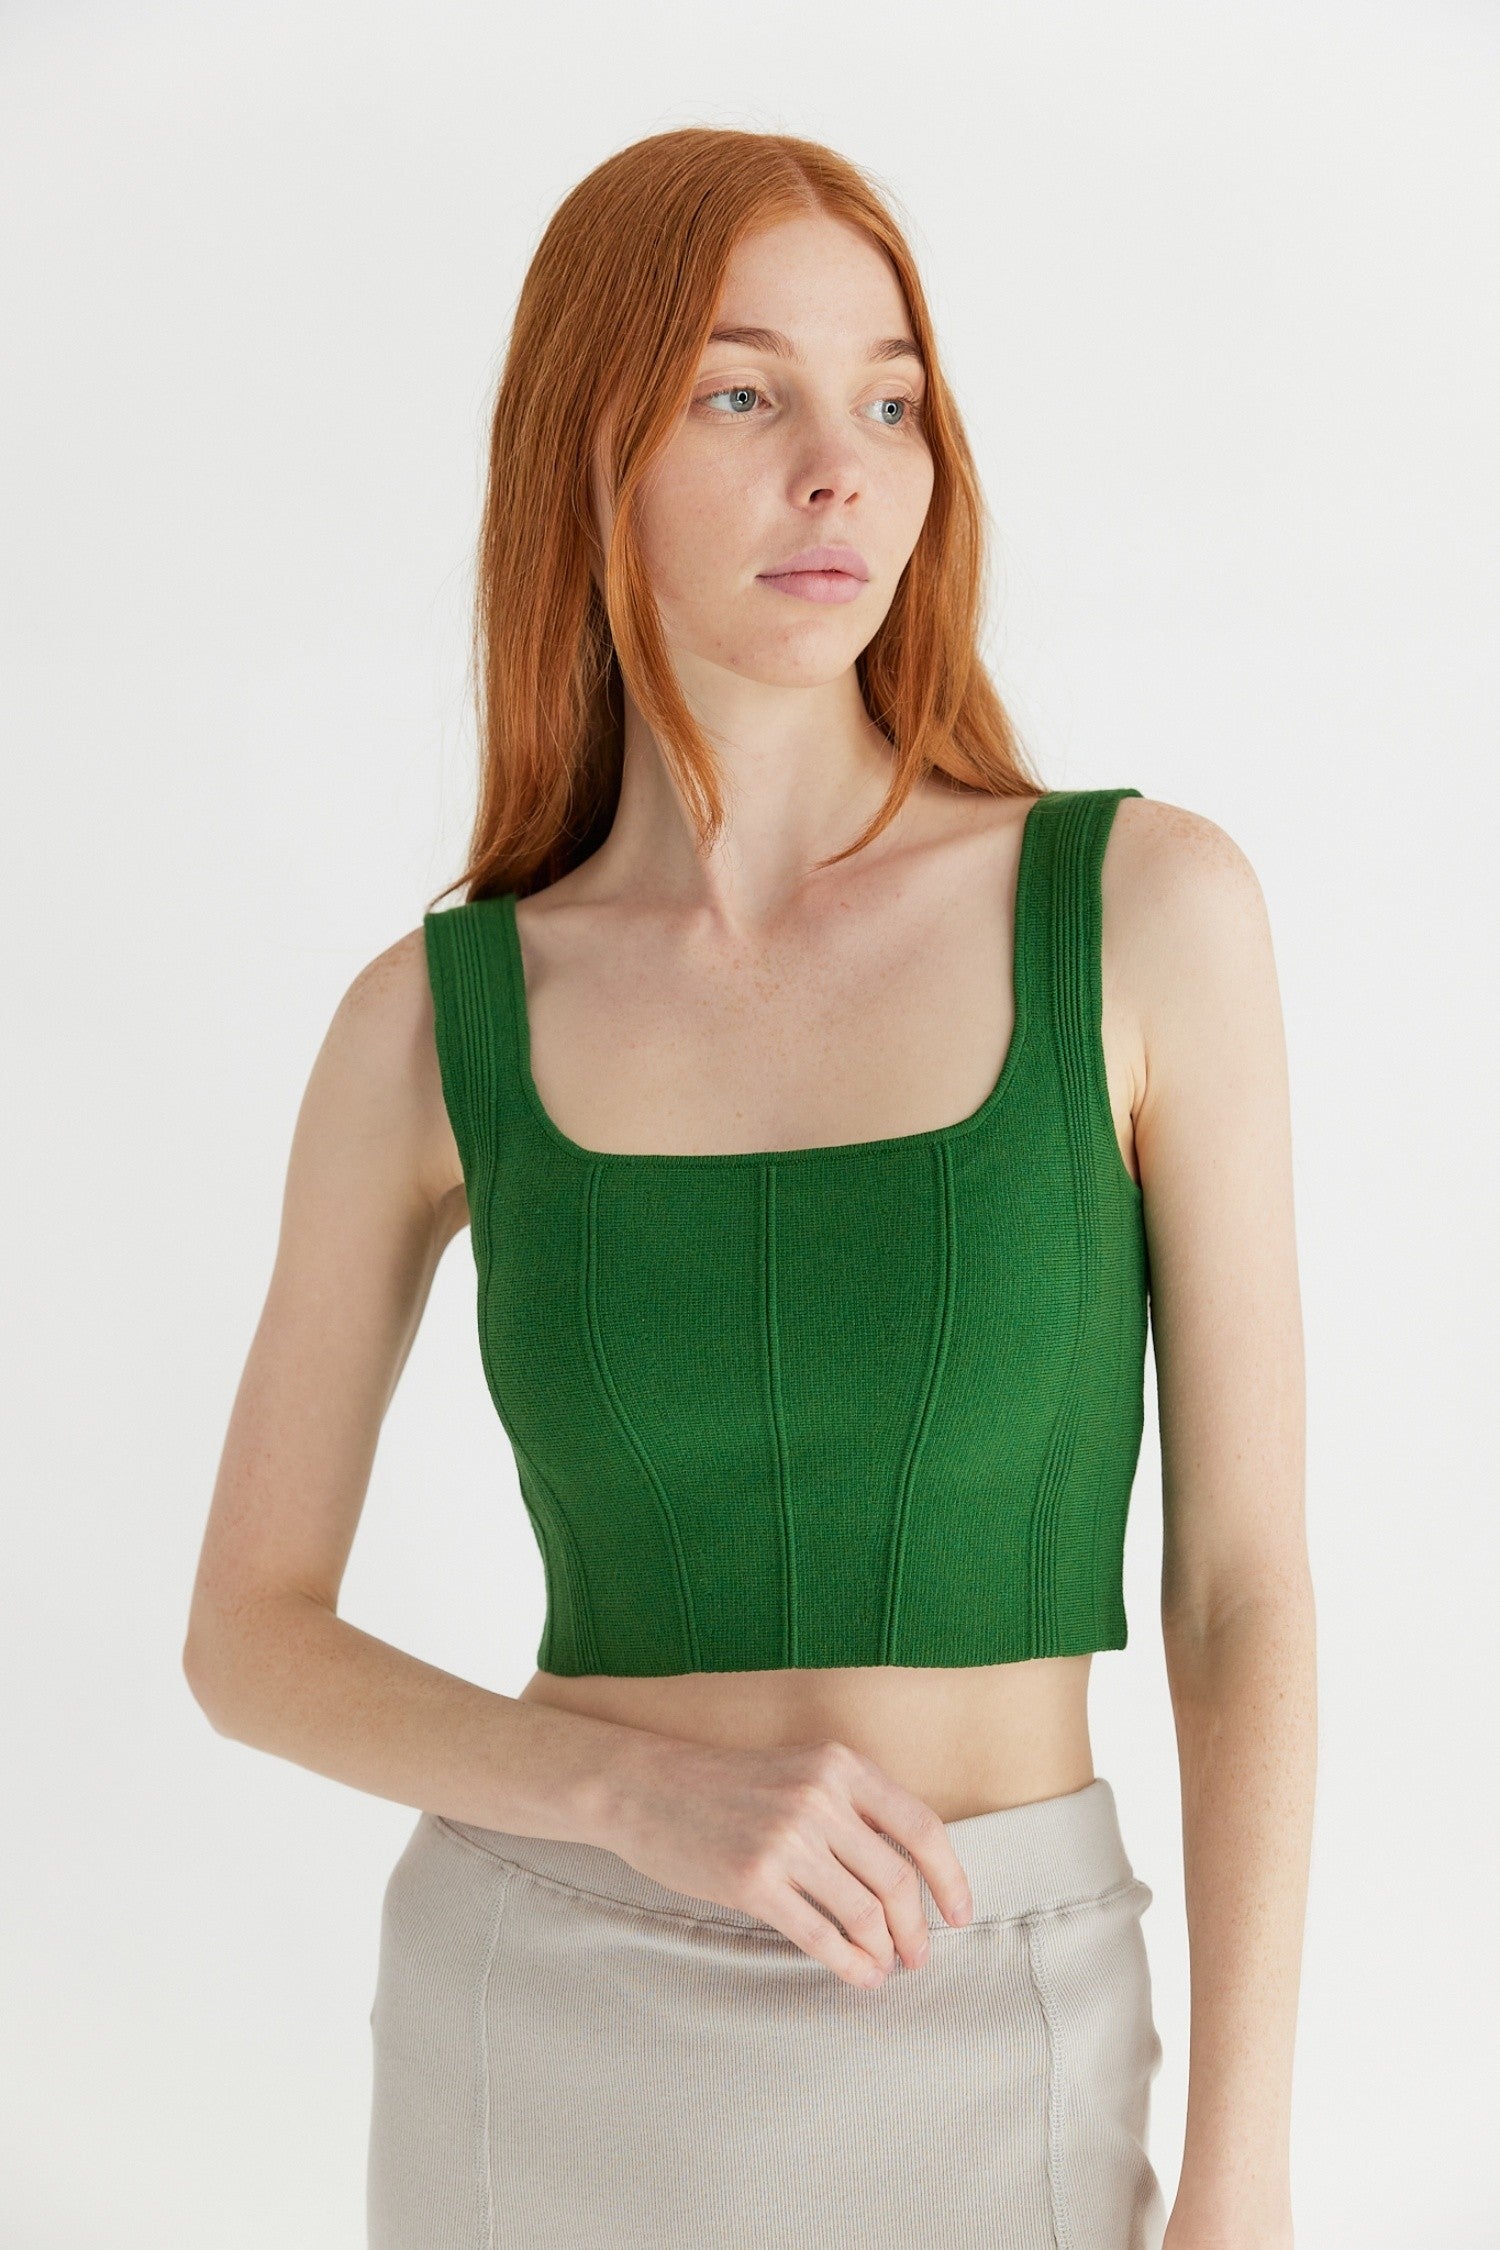 All : Row, The Millie Top in Green - Boutique Dandelion